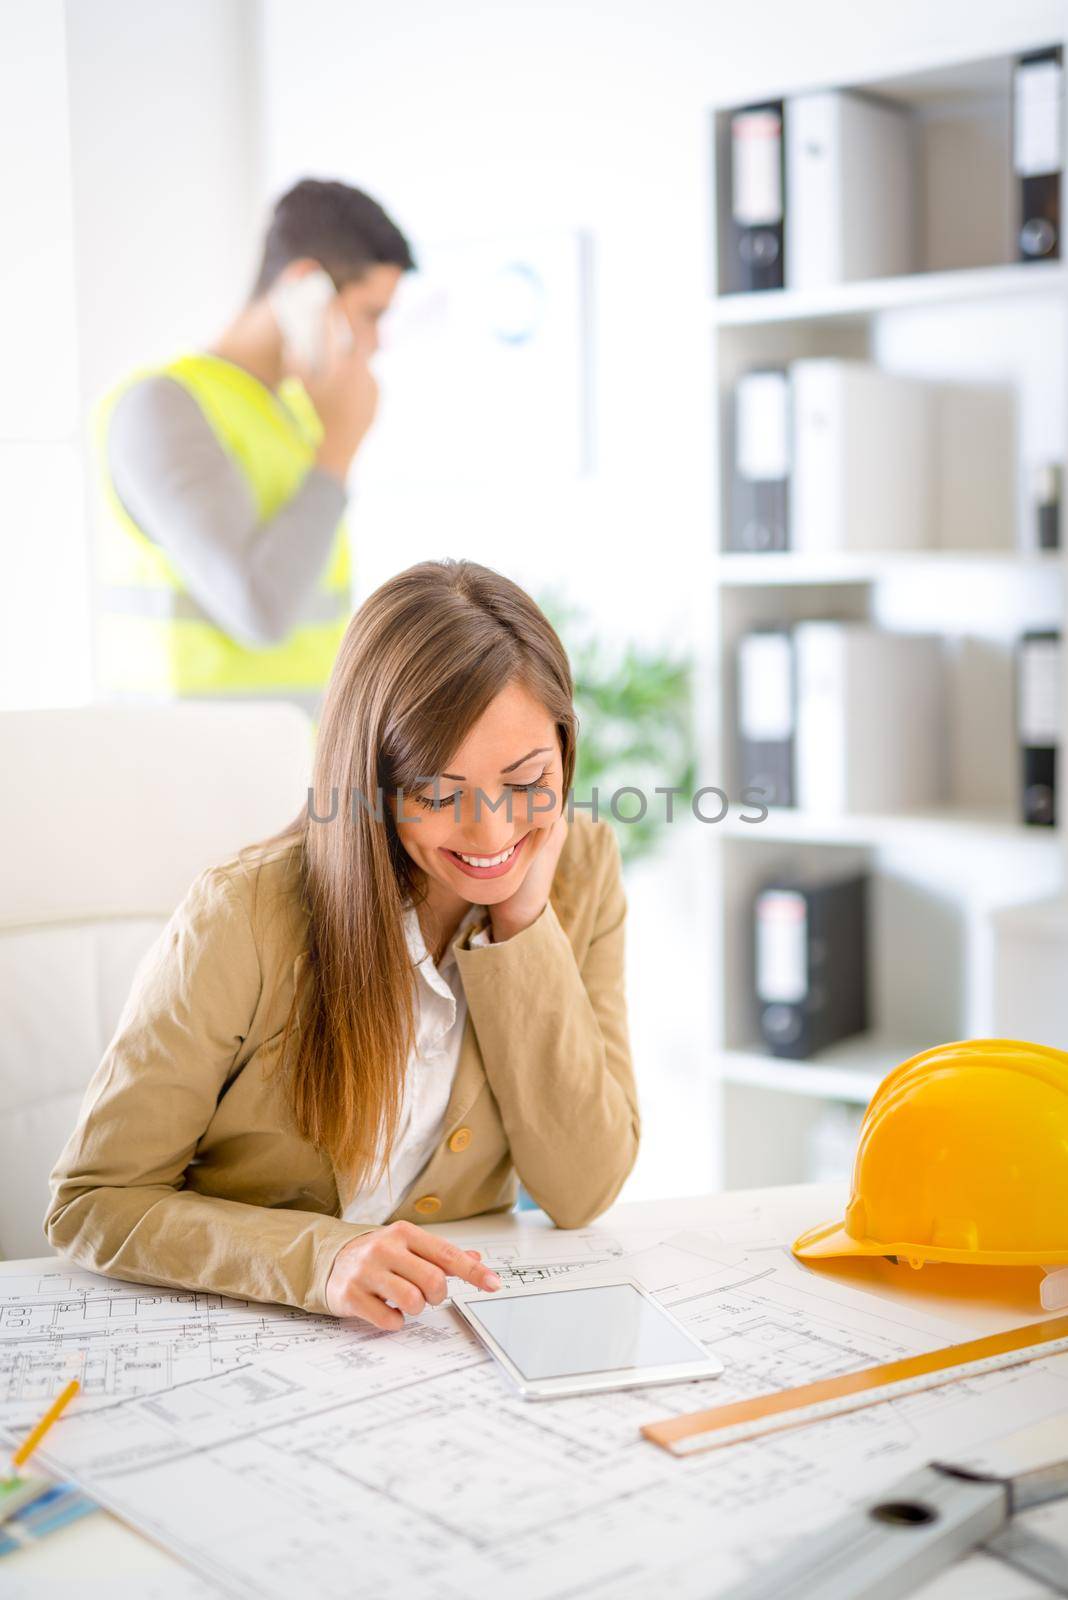 Smiling young woman constructor analyzing blueprint on tablet at desk in office.